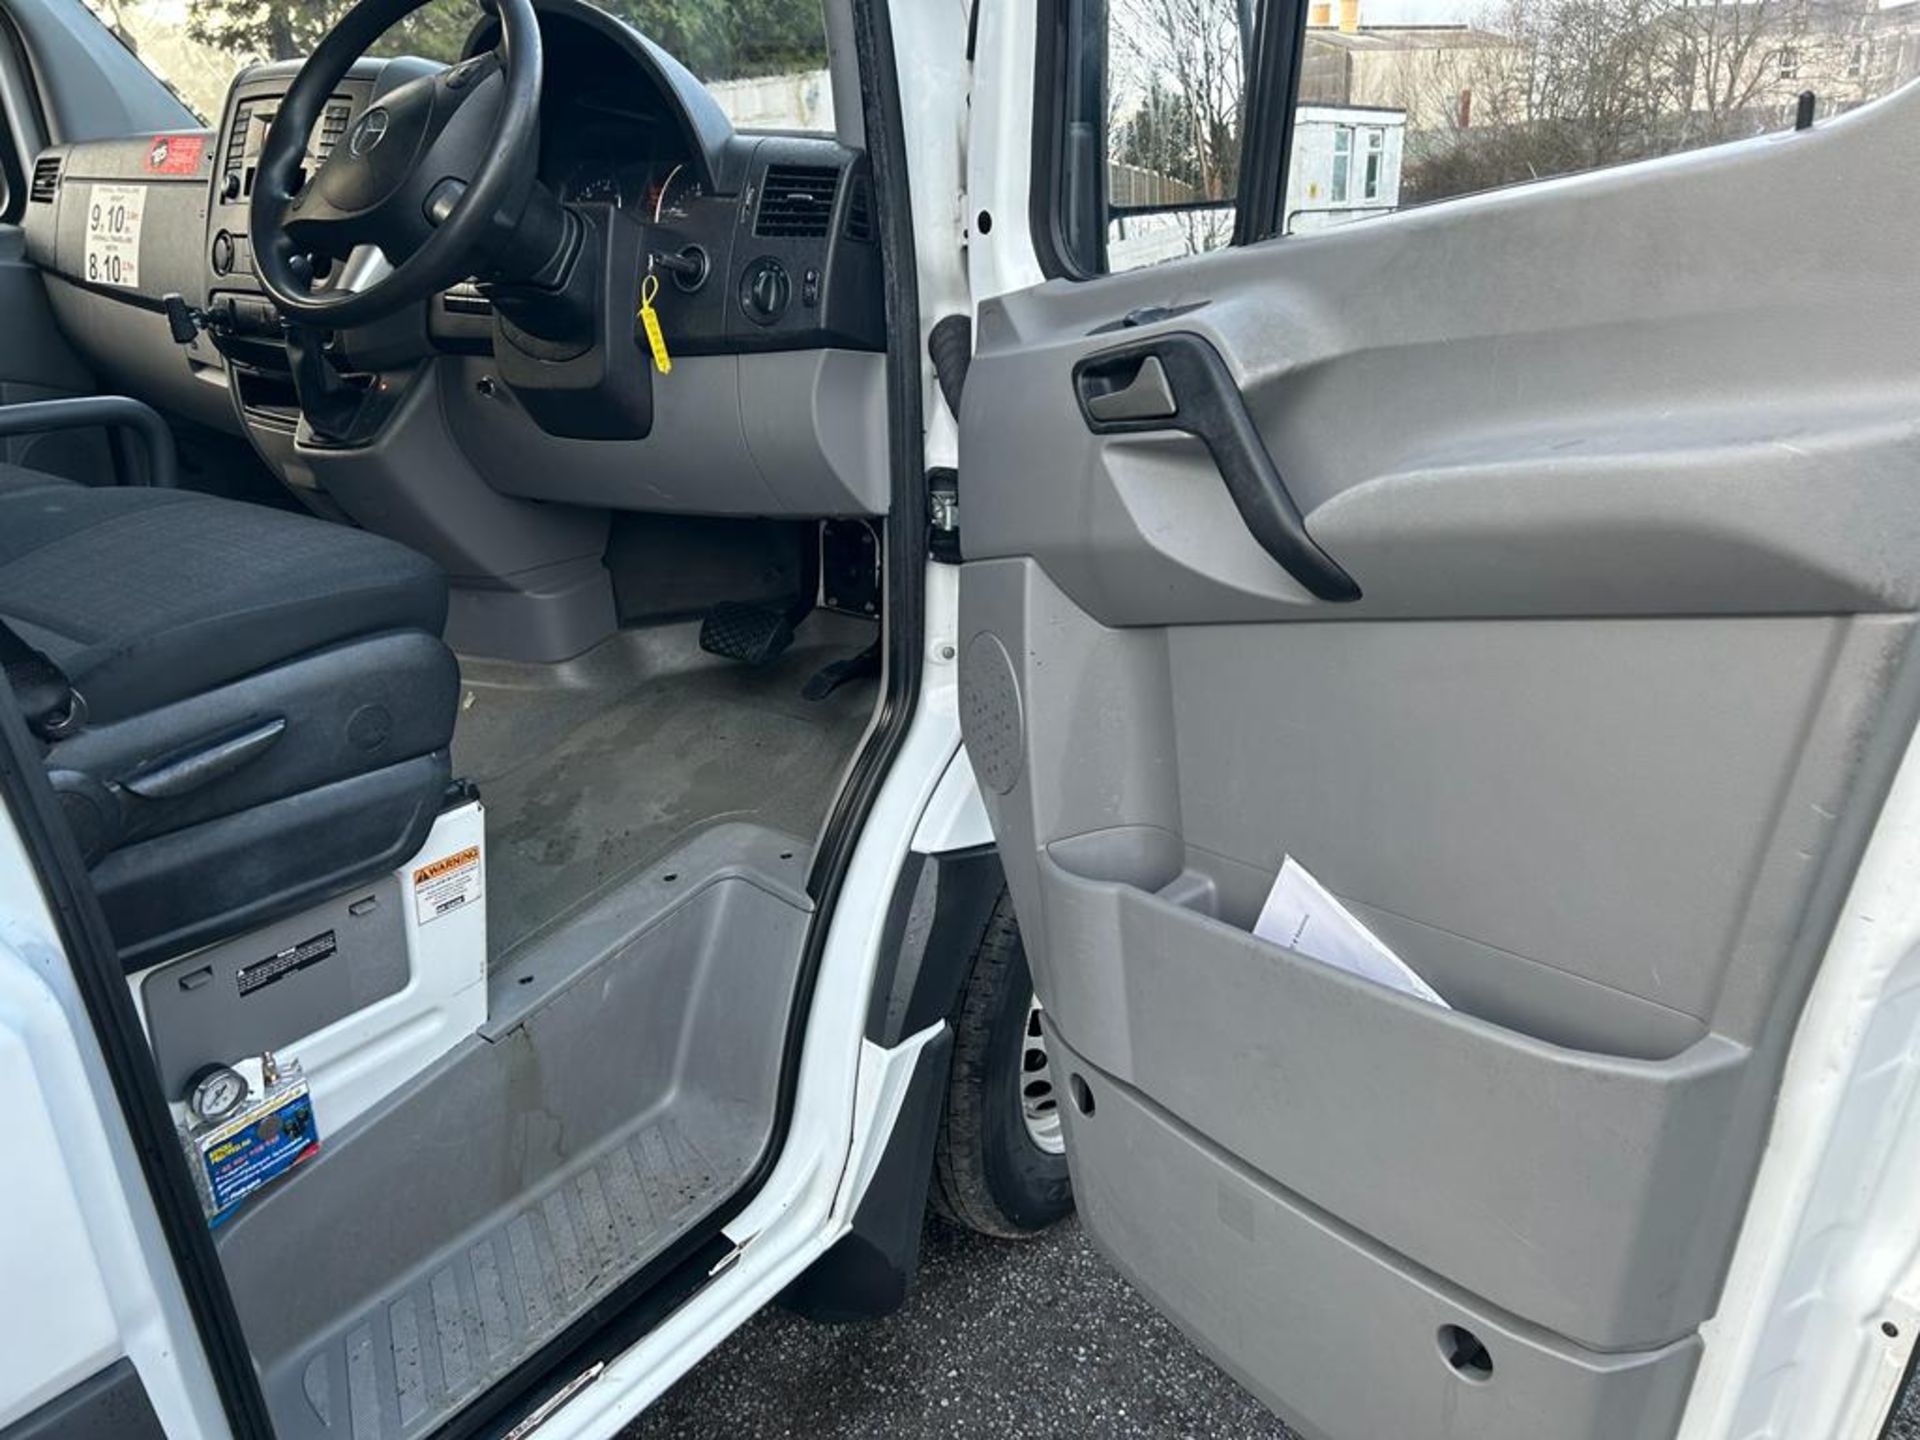 2018 MERCEDES SPRINTER RECOVERY - Image 2 of 17